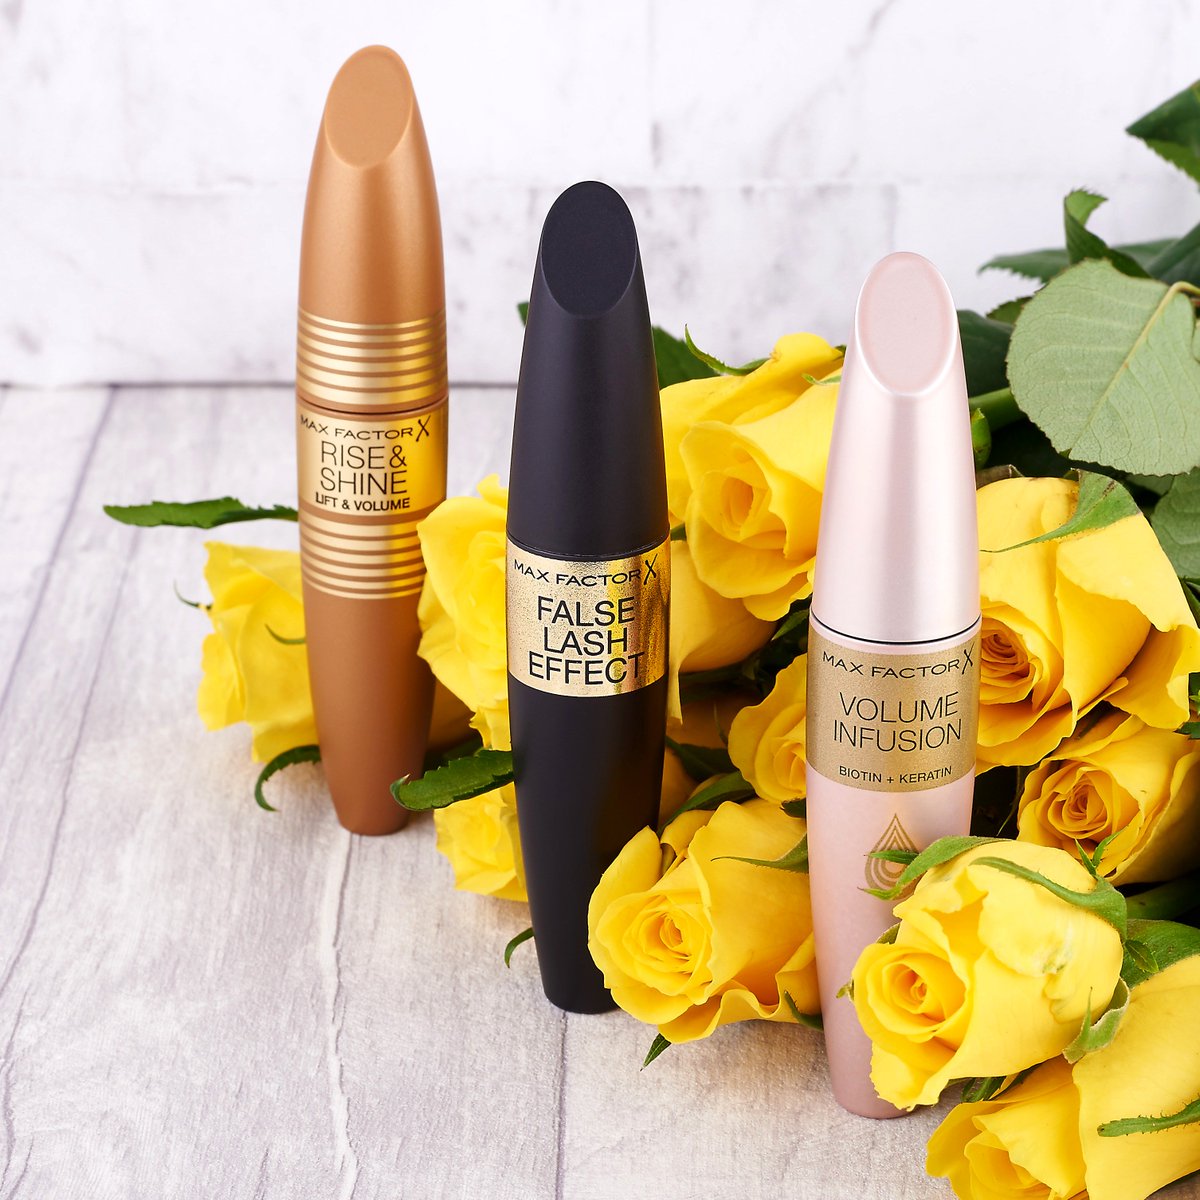 Give your lashes some love 💕 Introducing your new favourite mascara... Enter the Amazon x Max Factor #LashLounge to find the perfect formula for your lashes amzn.to/2GosBMW #MaxFactor #Amazon #LashLove #FalseLashEffect #RiseAndShine #VolumeInfusion